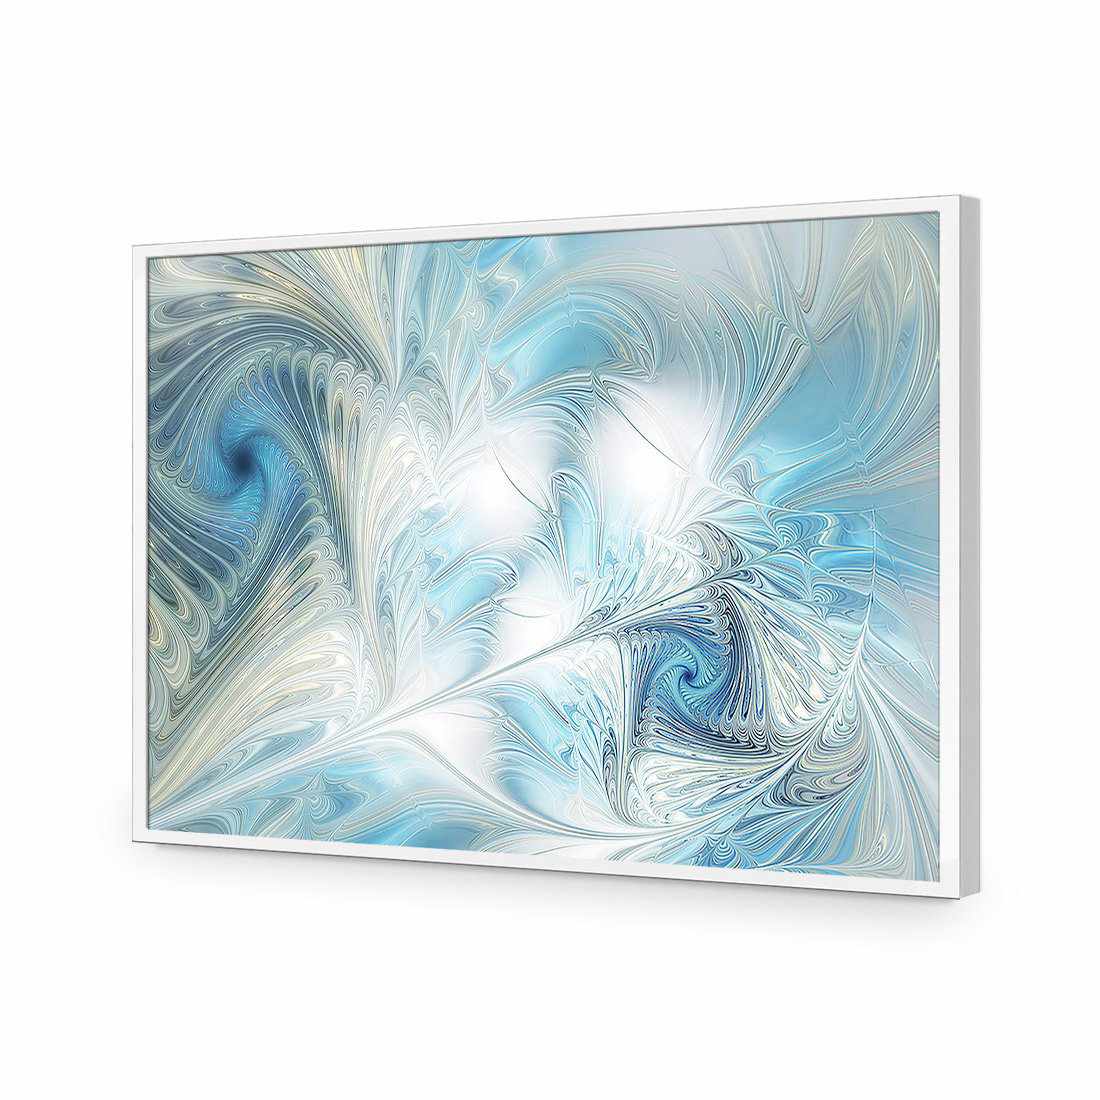 Travesty-Acrylic-Wall Art Design-Without Border-Acrylic - White Frame-45x30cm-Wall Art Designs